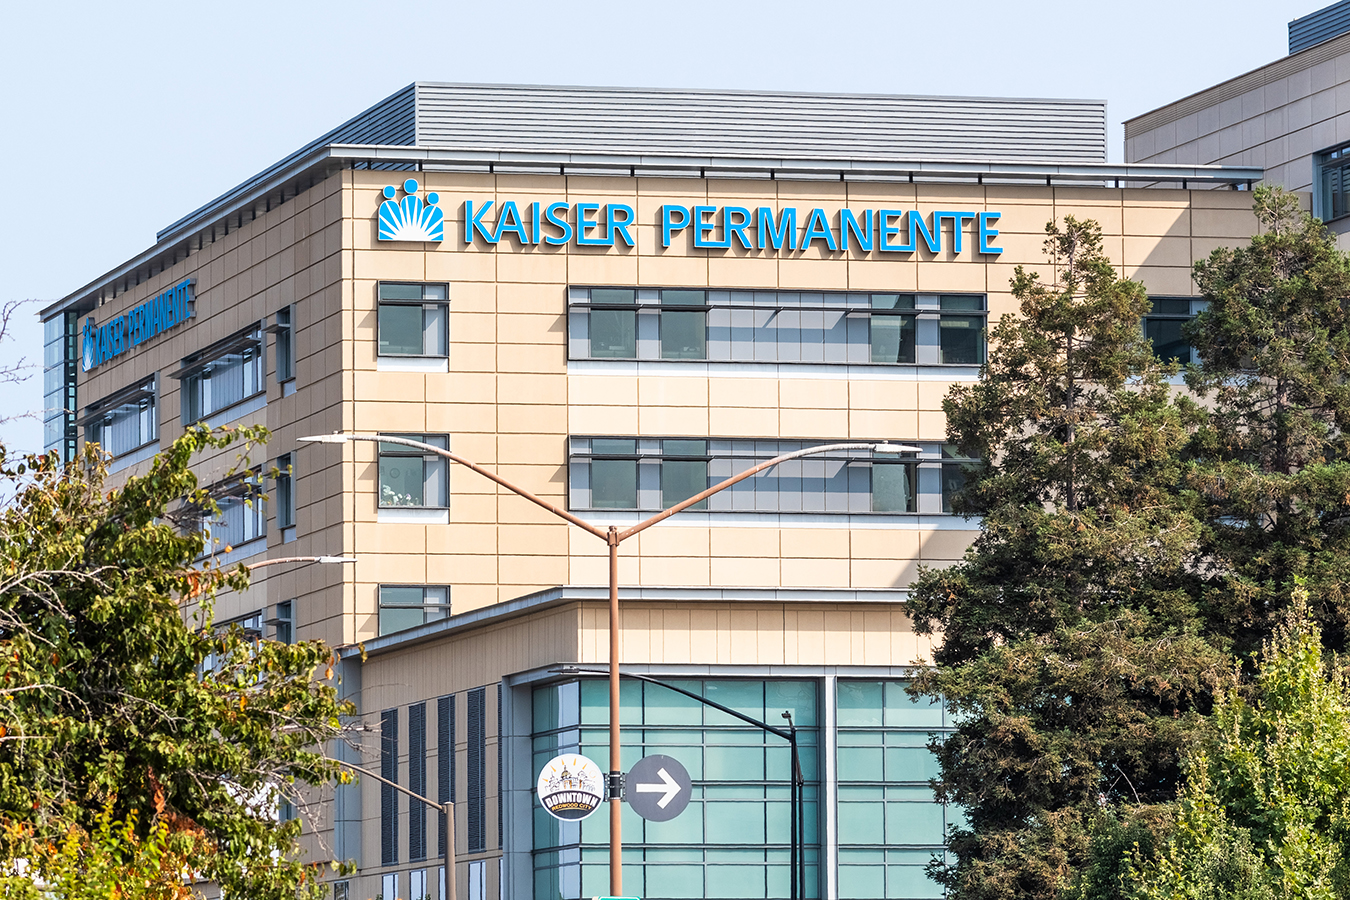 Kaiser permanente news releases centers for medicare and medicaid services woodlawn md social security